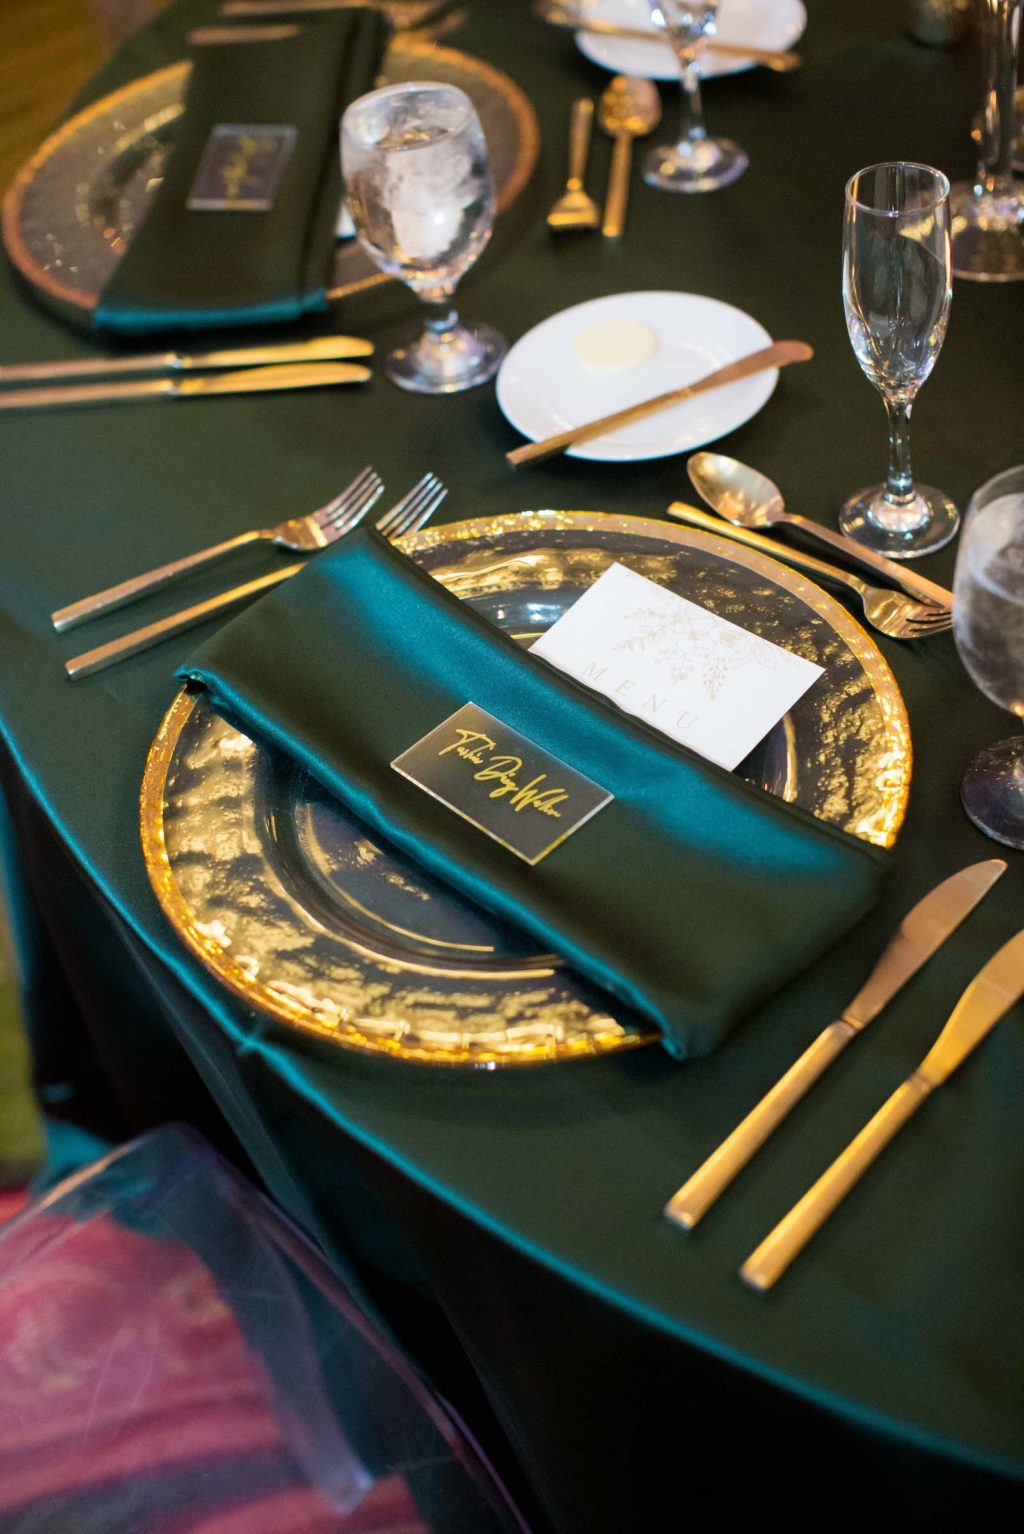 Elegant Wedding Reception Decor, Emerald Green Linens, Gold Chargers and Flatware, Acrylic Place Card | Tampa Bay Wedding Planner Parties A'la Carte | Wedding Rentals A Chair Affair